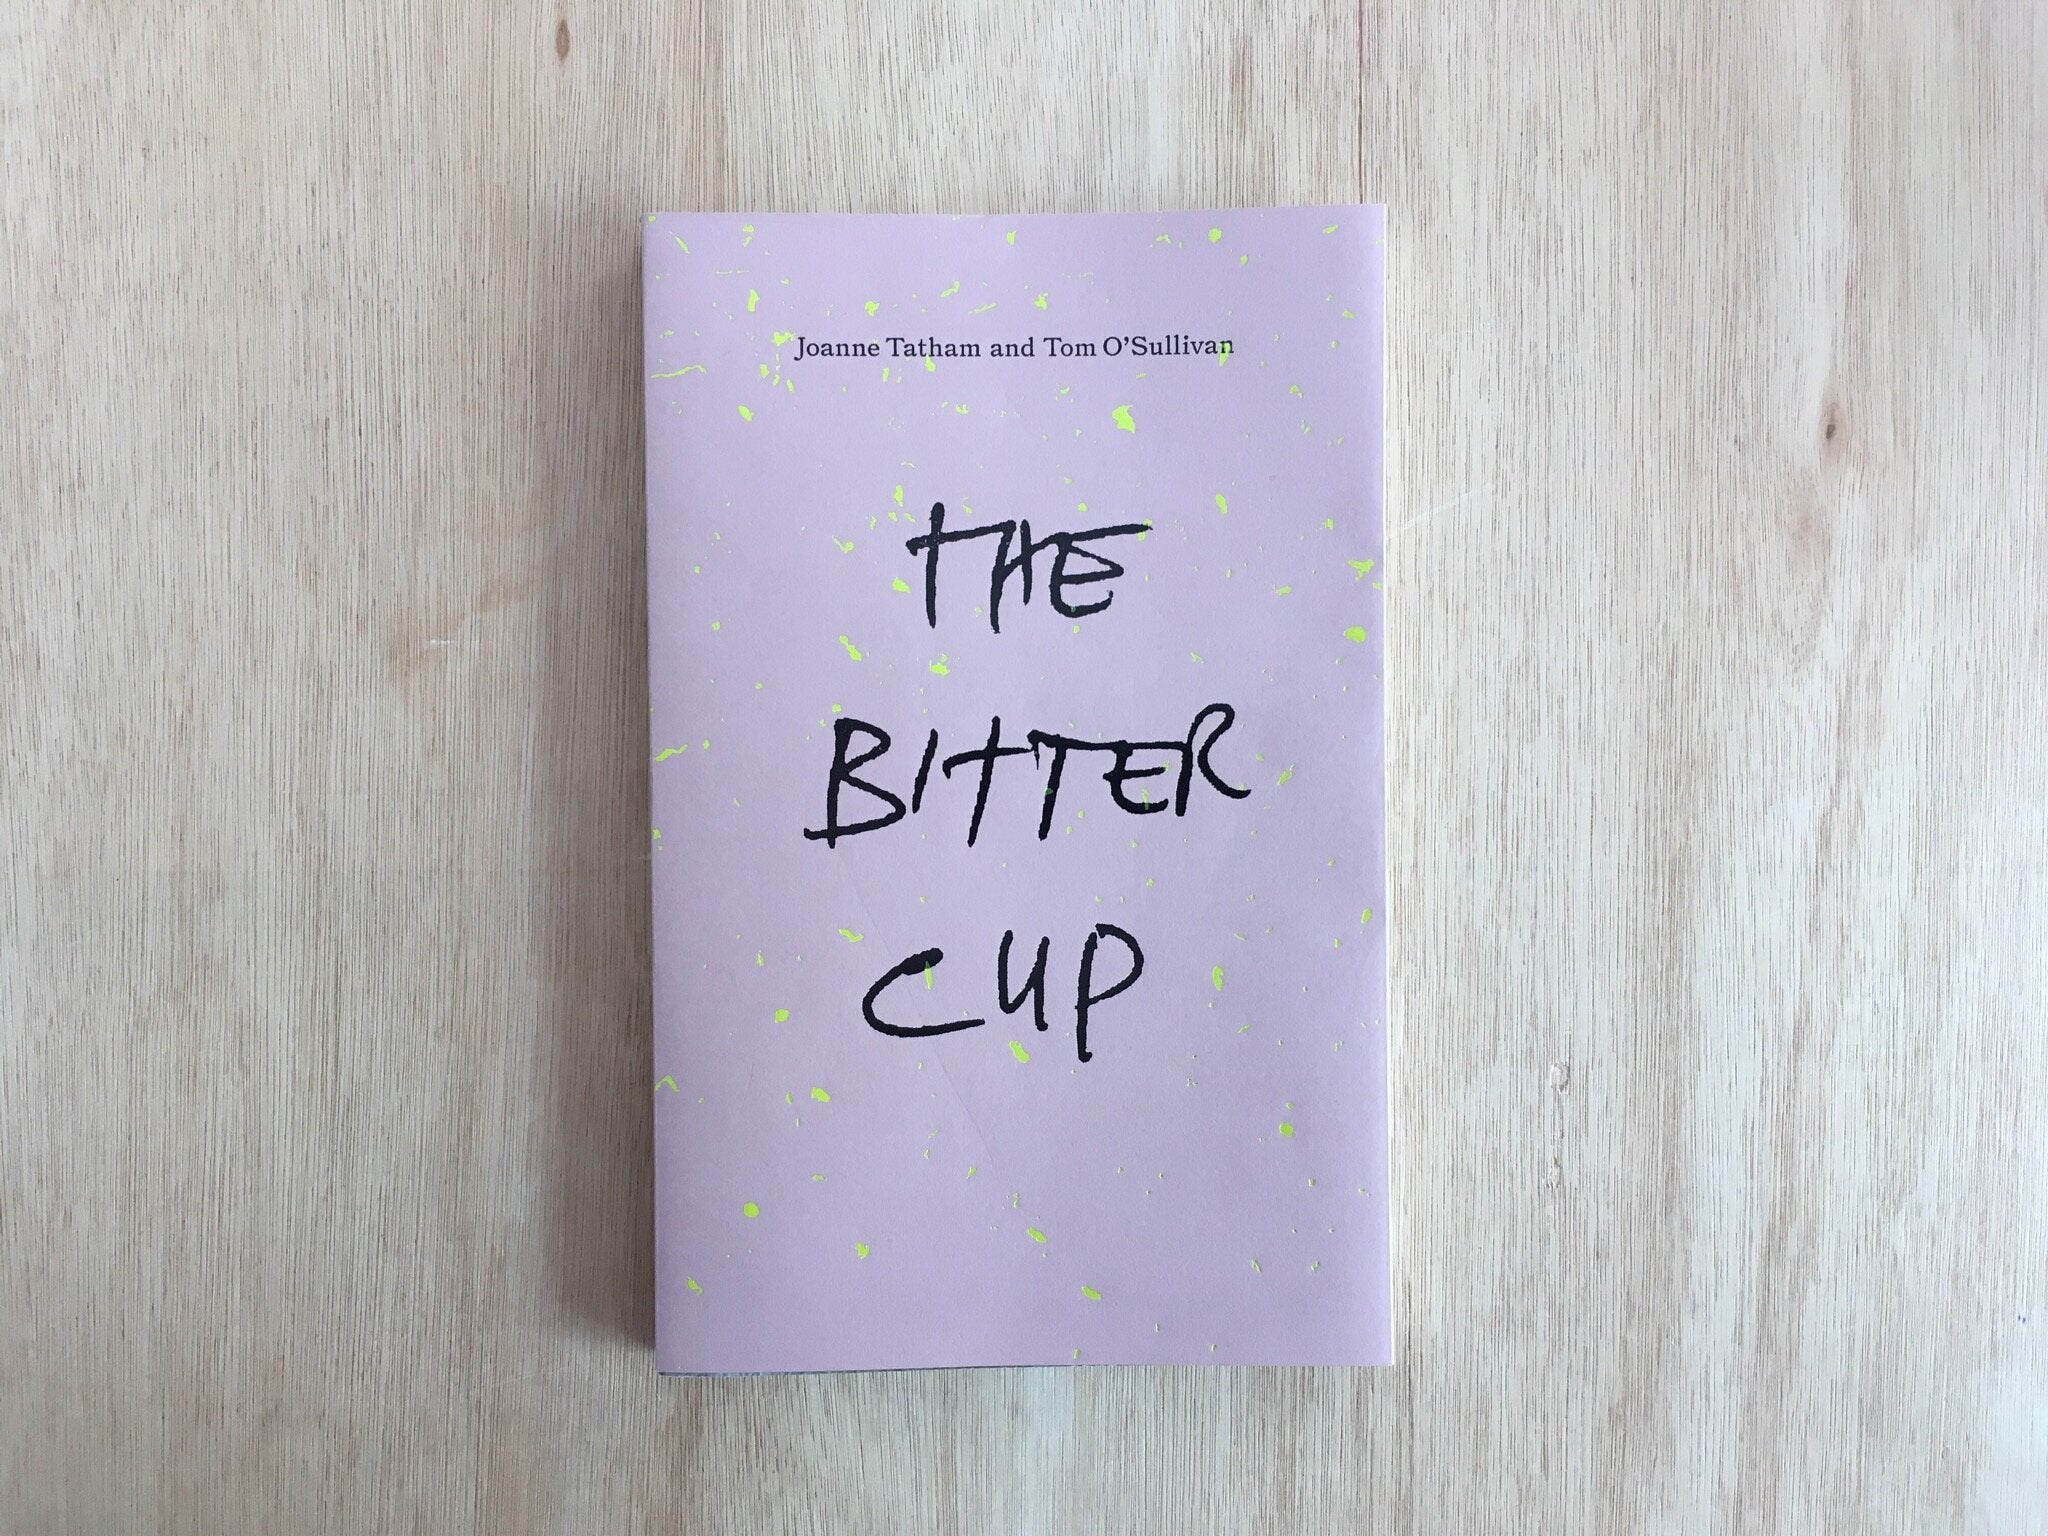 THE BITTER CUP by Joanne Tatham and Tom O'Sullivan